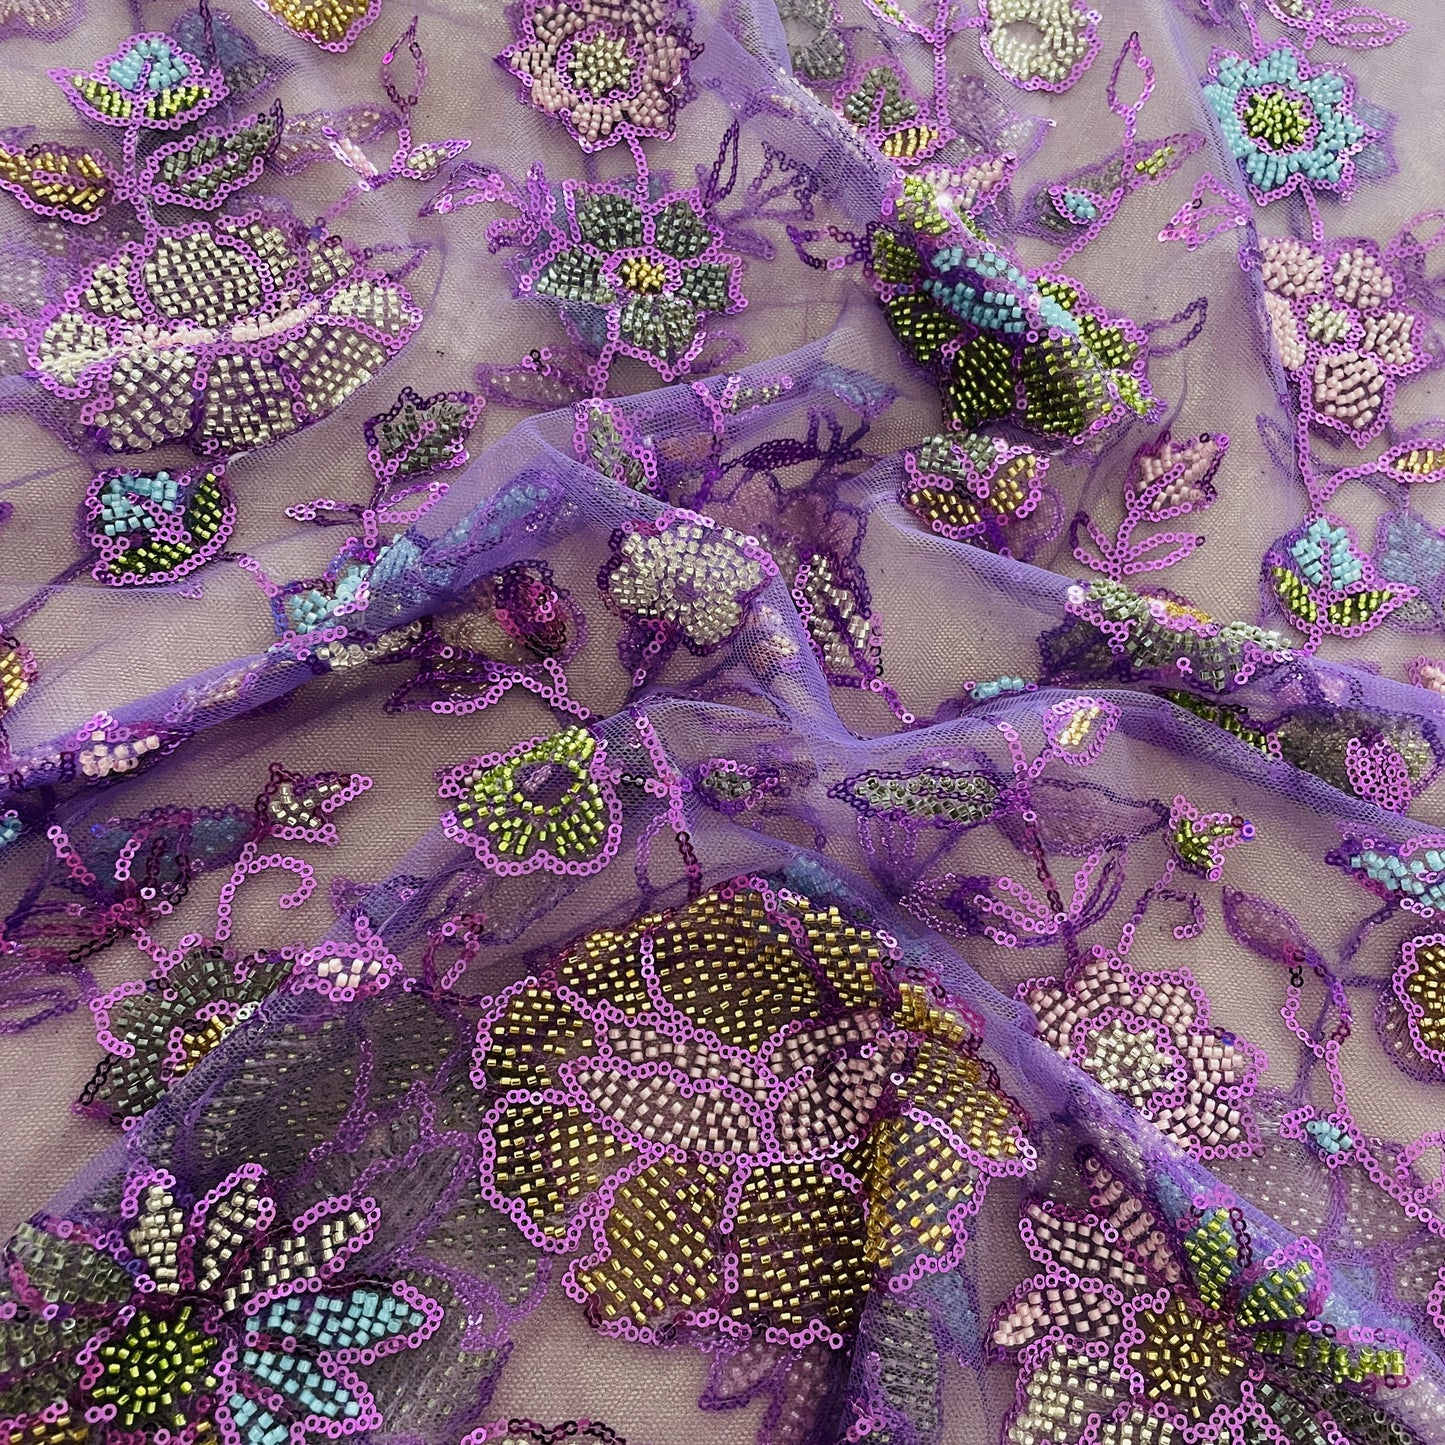 Premium Purple Floral CutDana Sequins Embroidery Net Fabric